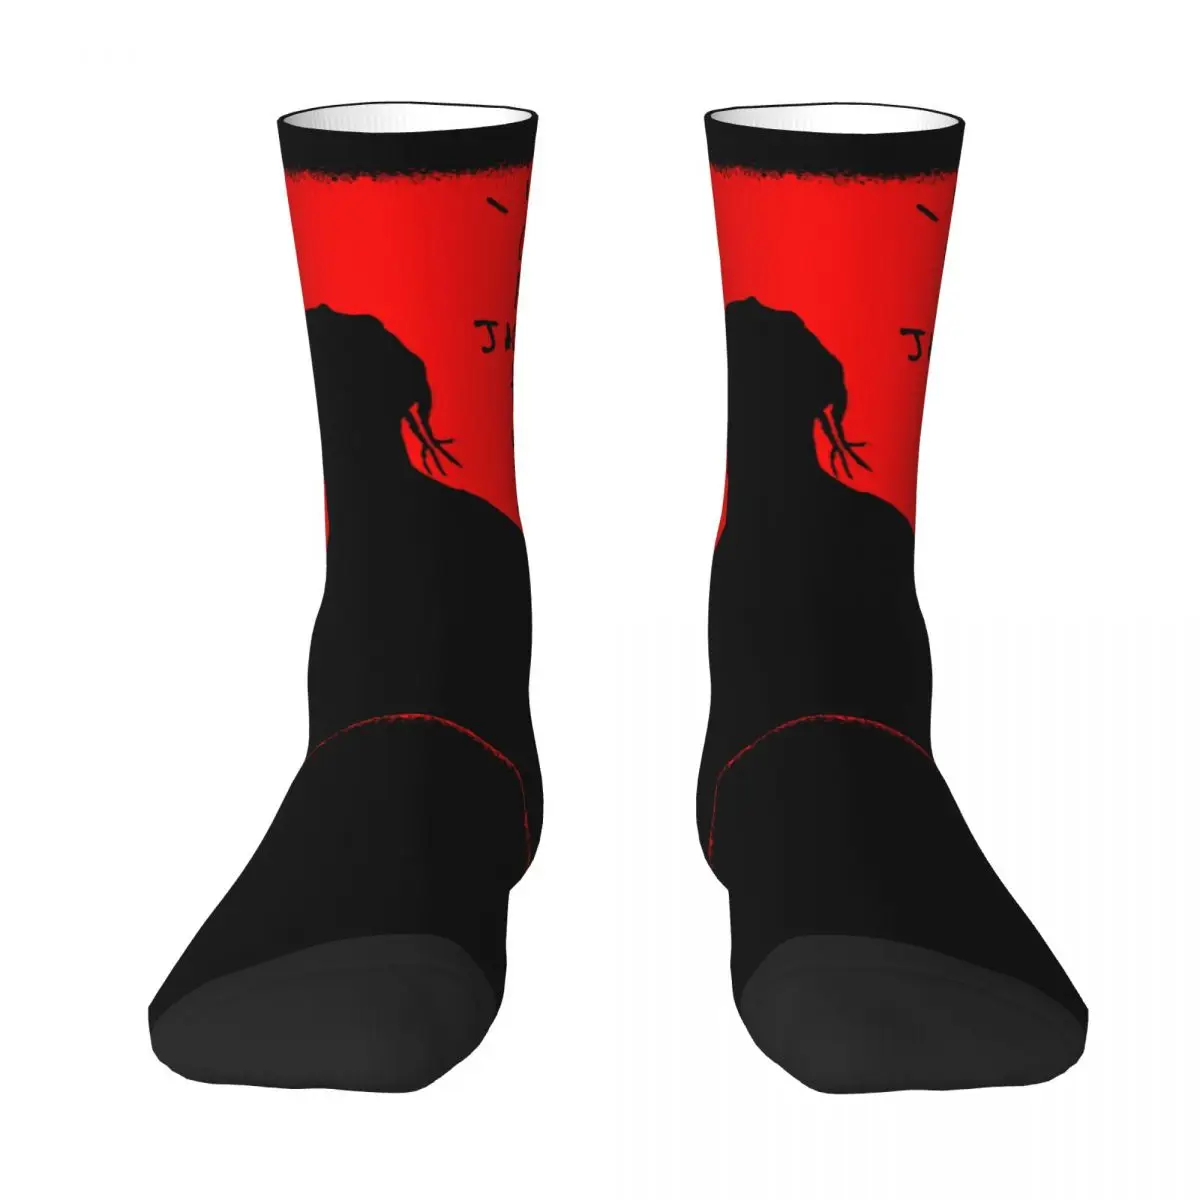 

Funny Graphic Travis And Scotts Silhouette Cactus Jack Mcdonalds Re Adult Socks BEST TO BUY Field pack Elastic Stockings Nerd